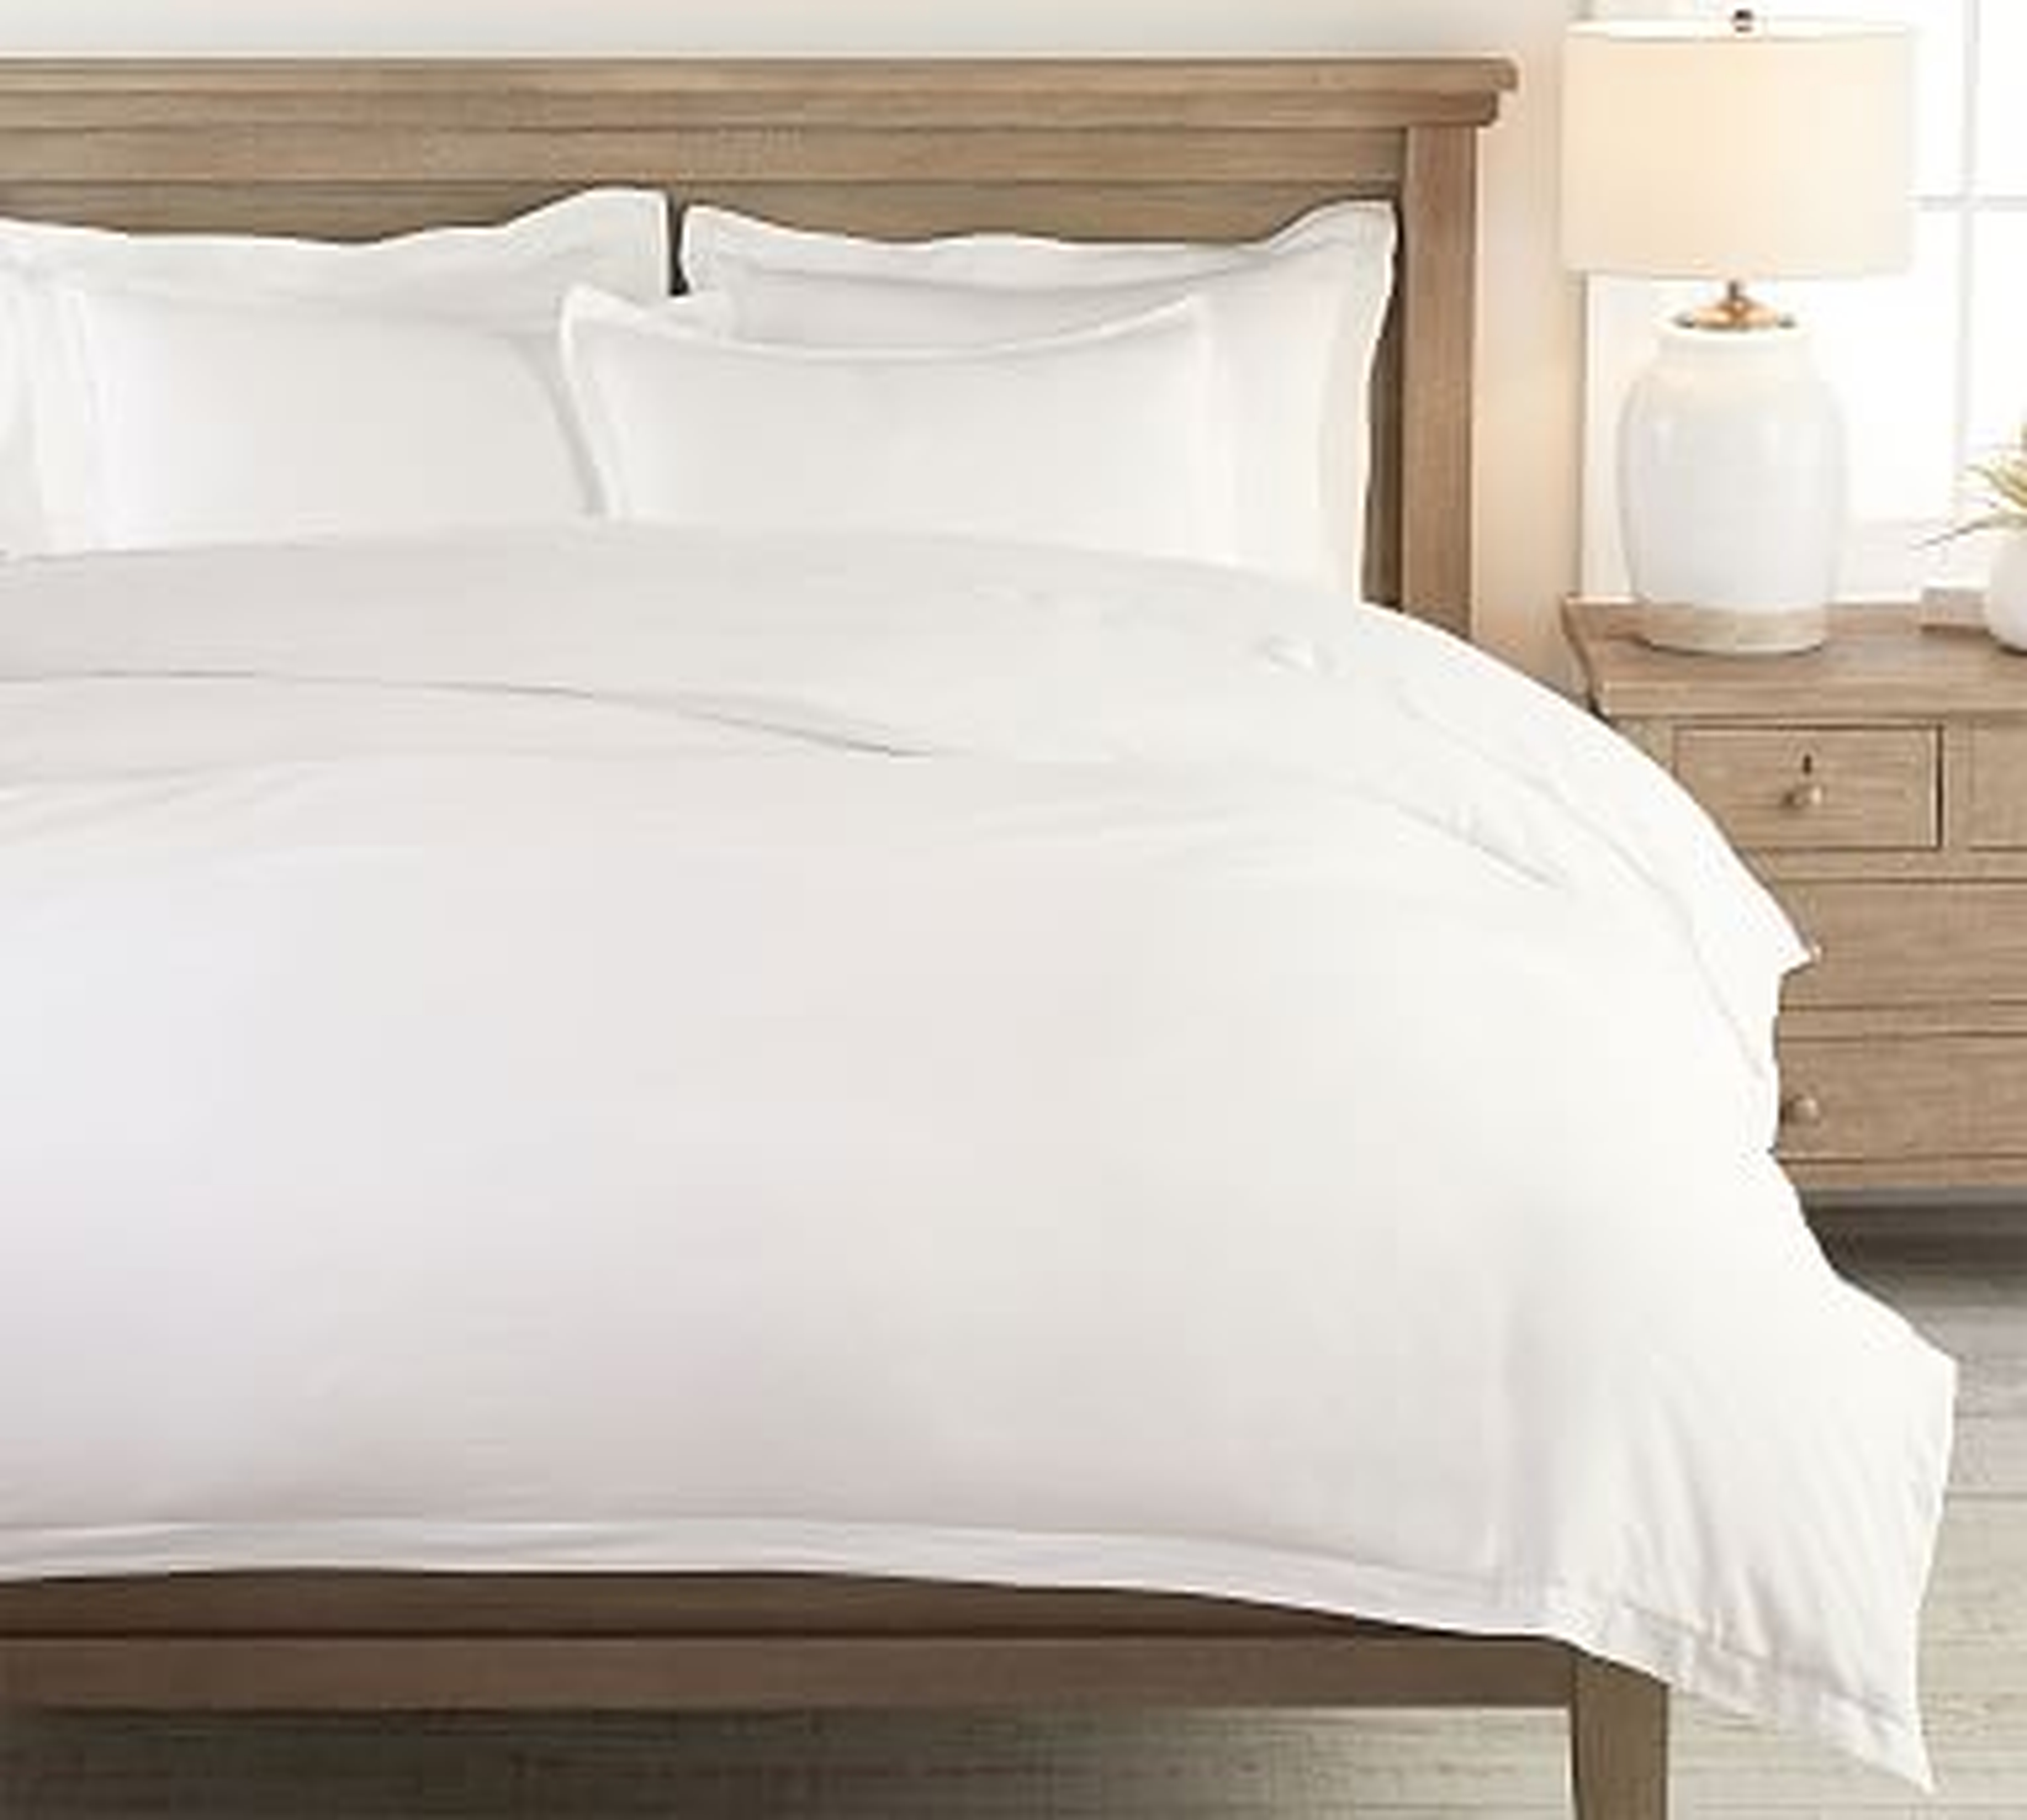 Washed Sateen Duvet Cover, Full/Queen, White - Pottery Barn